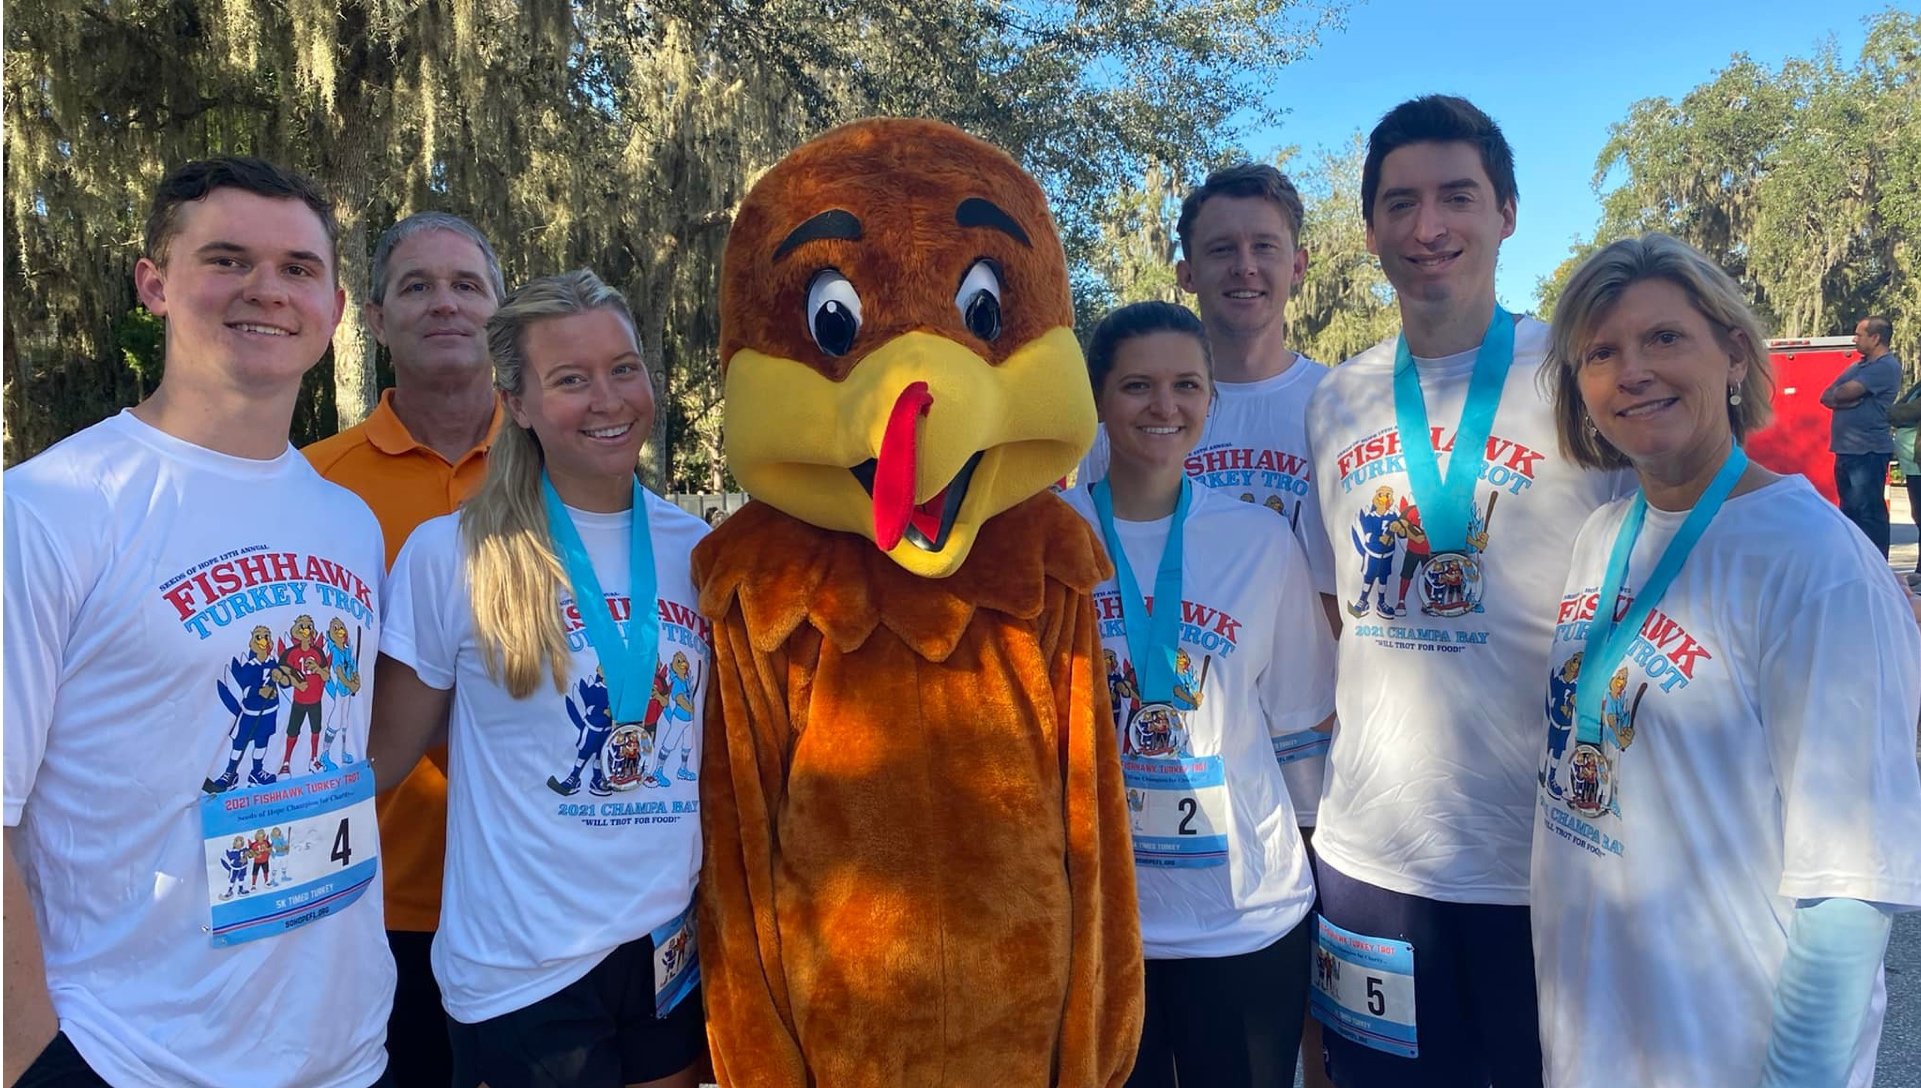 15th Annual FishHawk Turkey Trot To Support Seeds Of Hope Food Bank